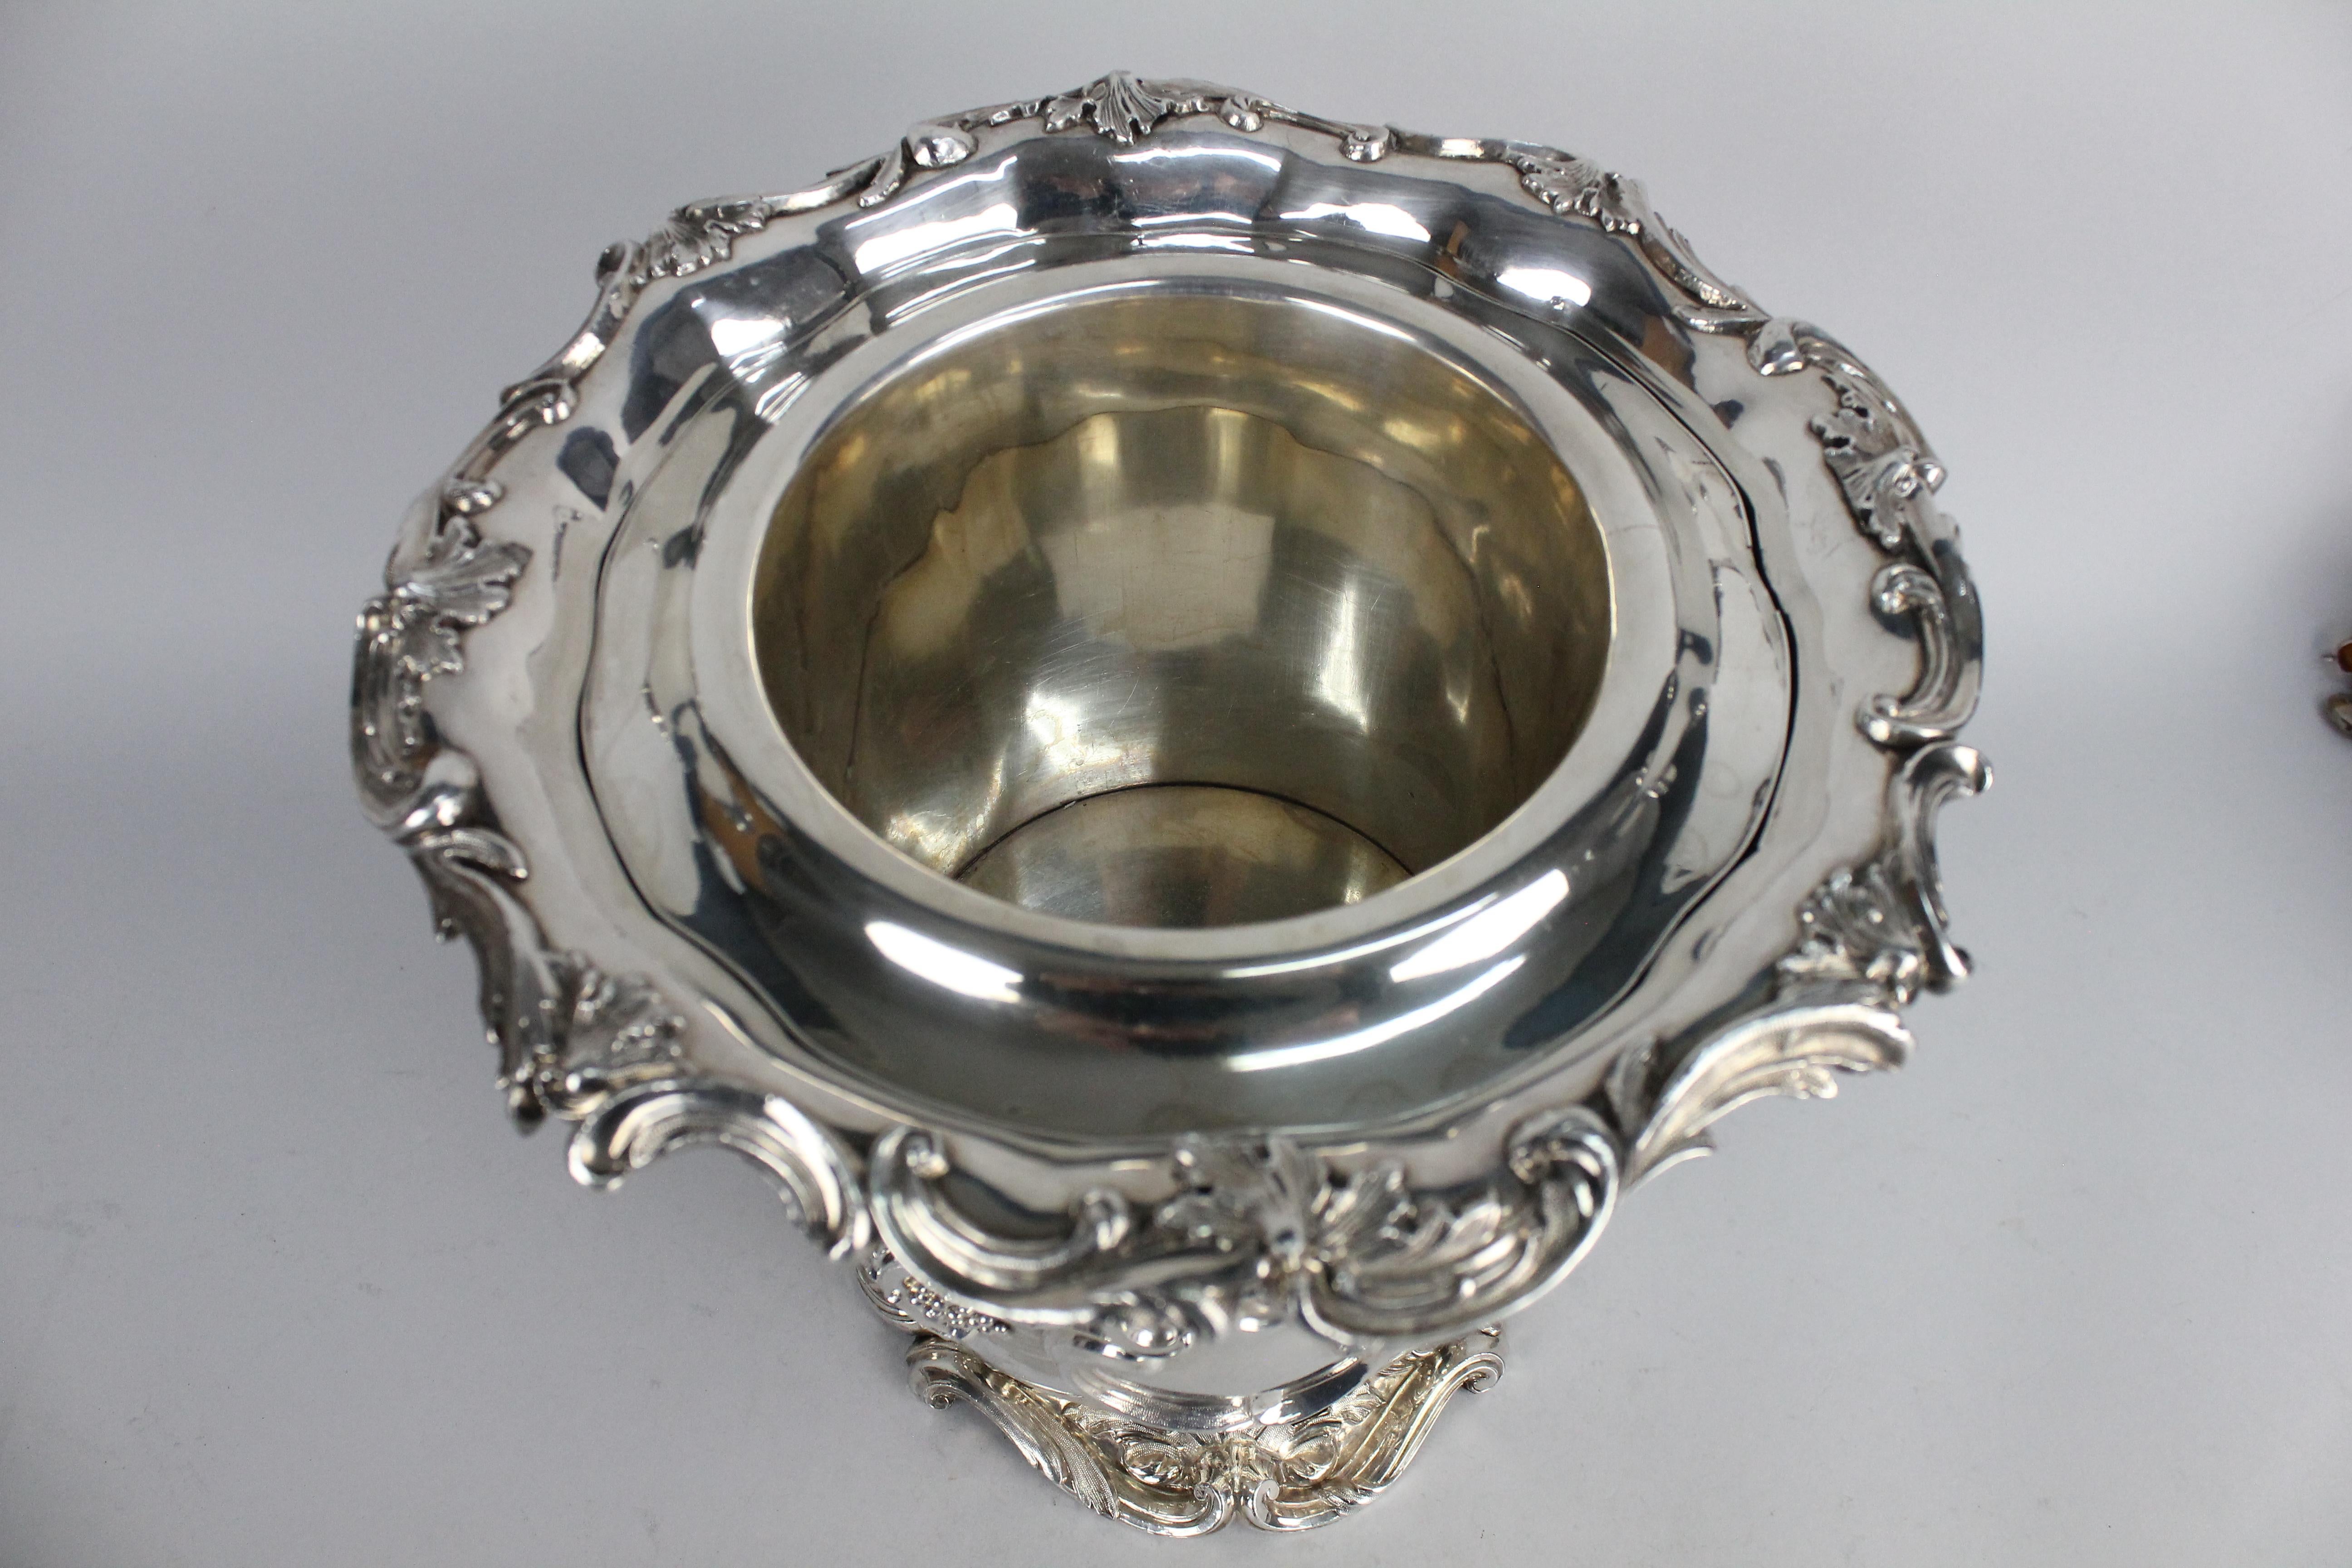 English Henry Wilkinson & Co. Magnificent Champagne / Wine Cooler in Silver Plate